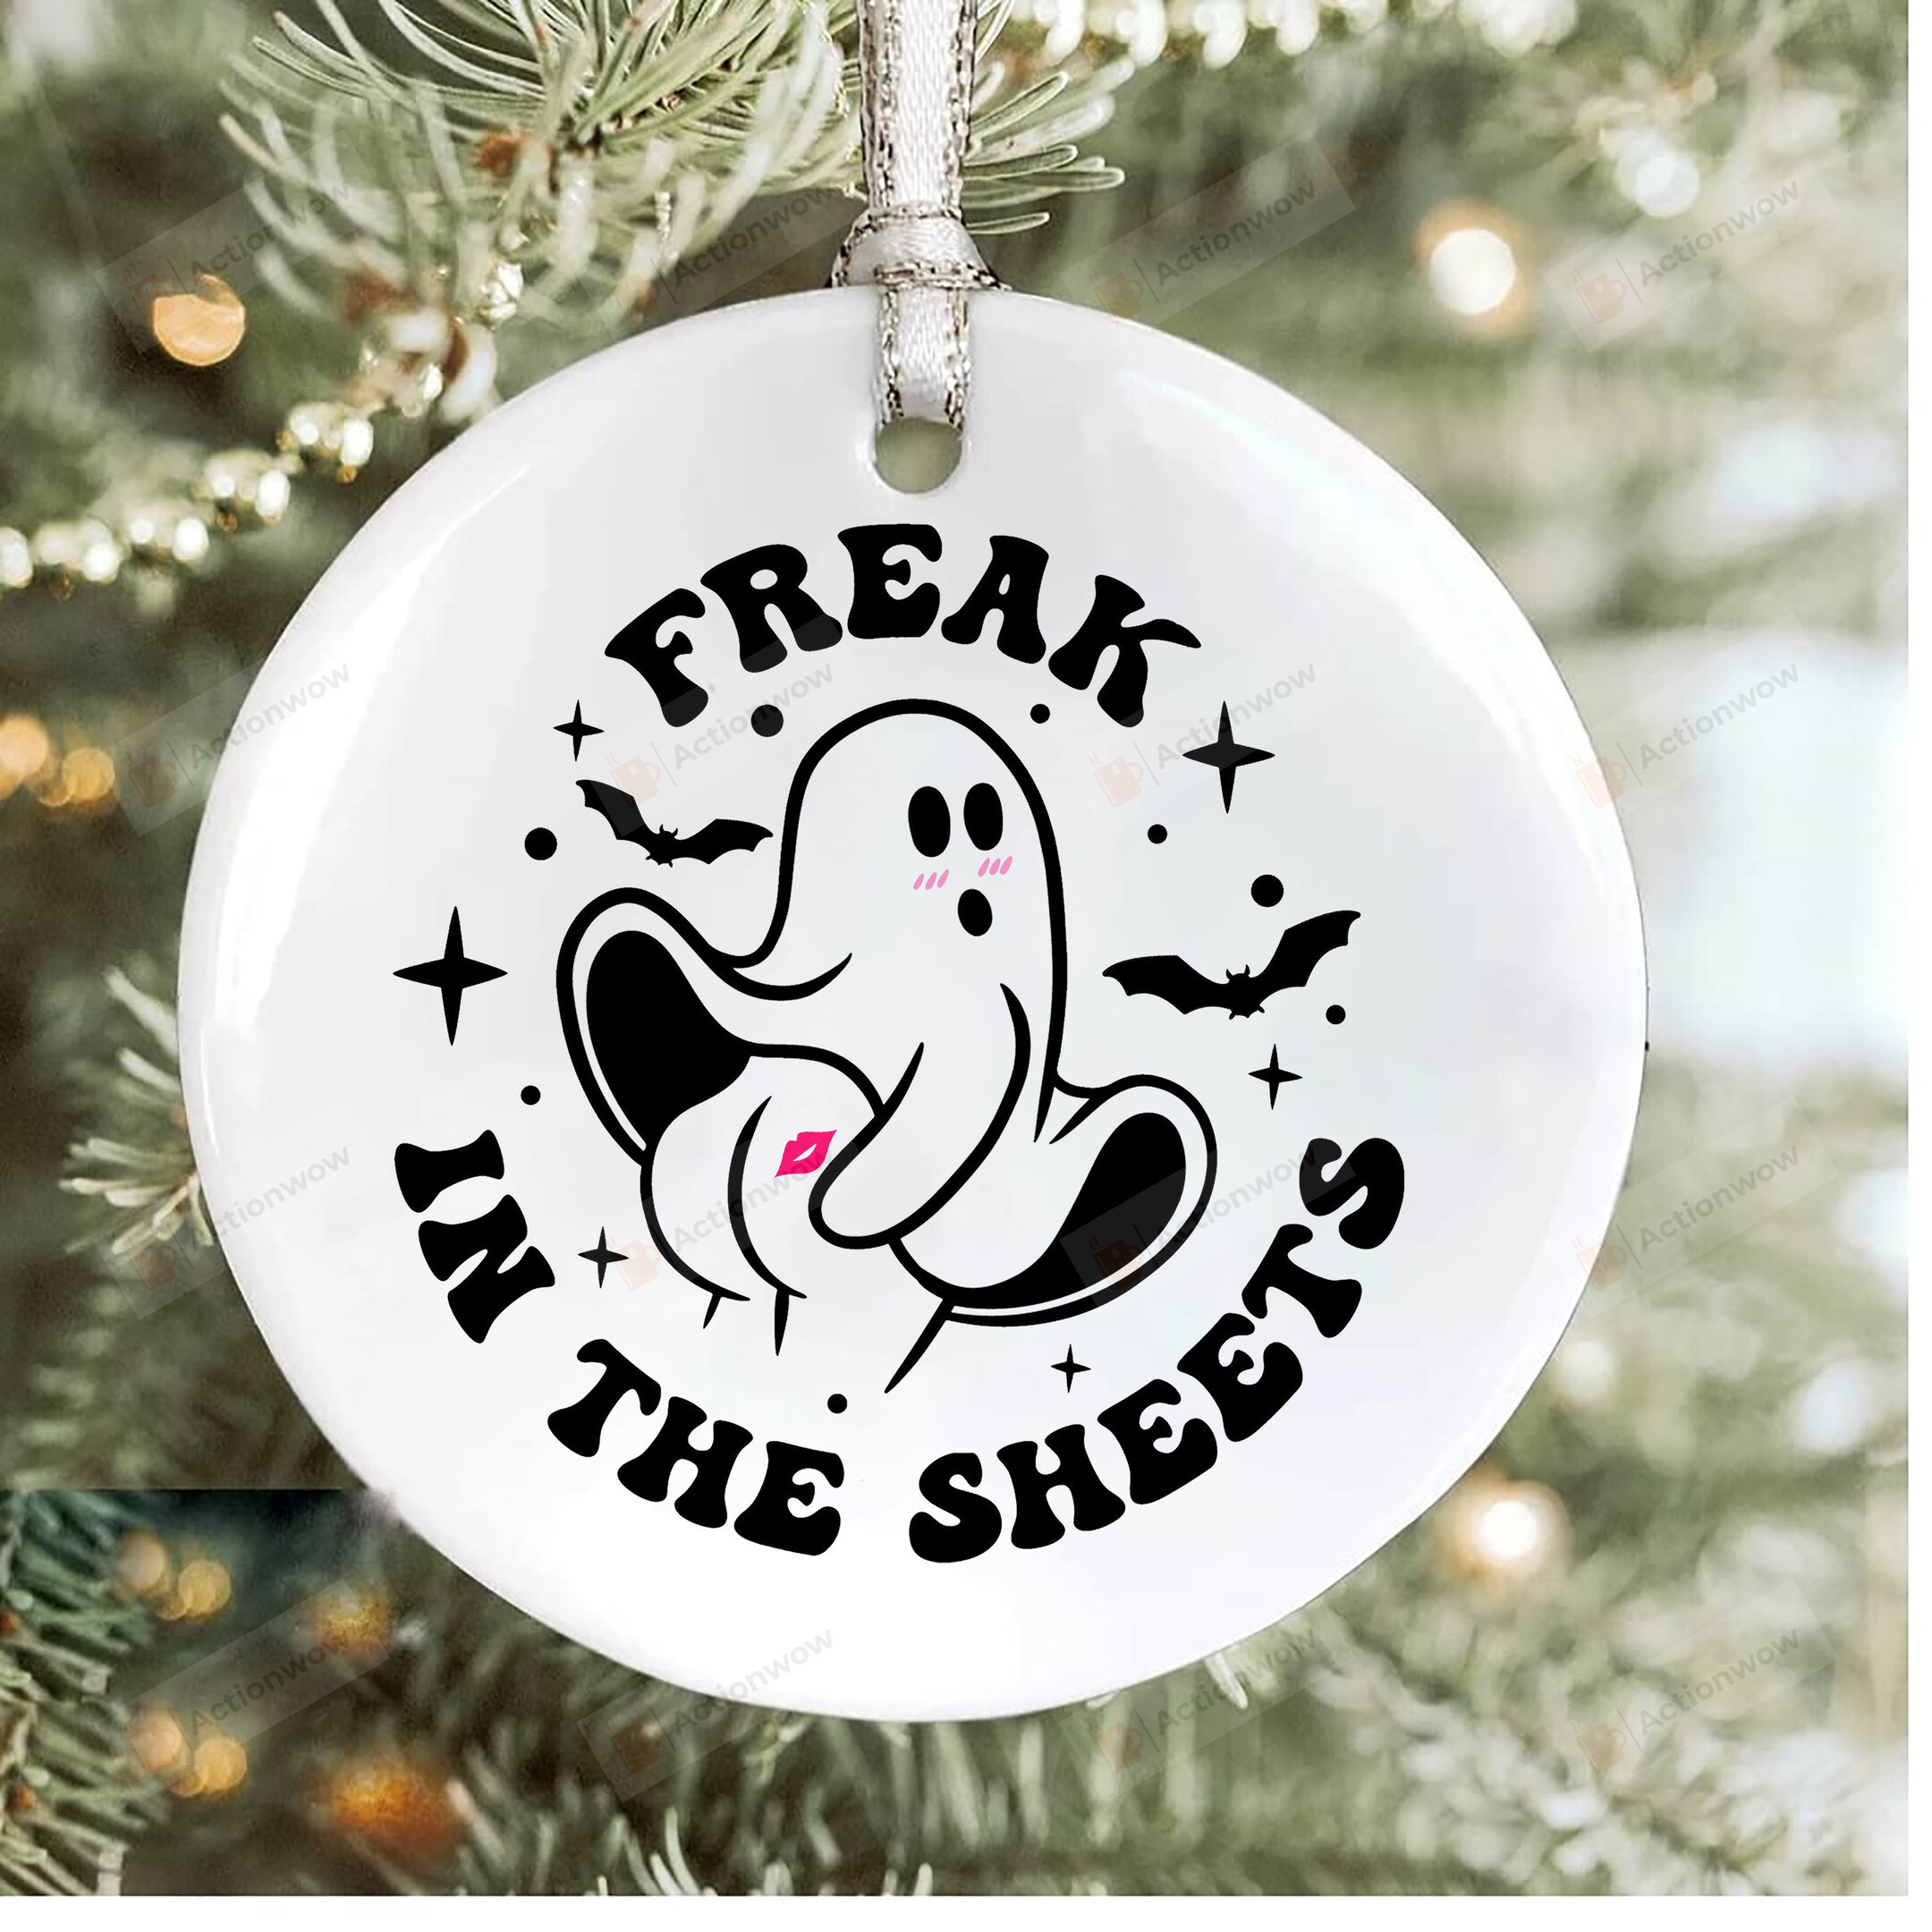 Freak In The Sheets Ornament, Funny Ghost Halloween Ornament, Fall Ghost Ornament, Cute Ghost Ornament